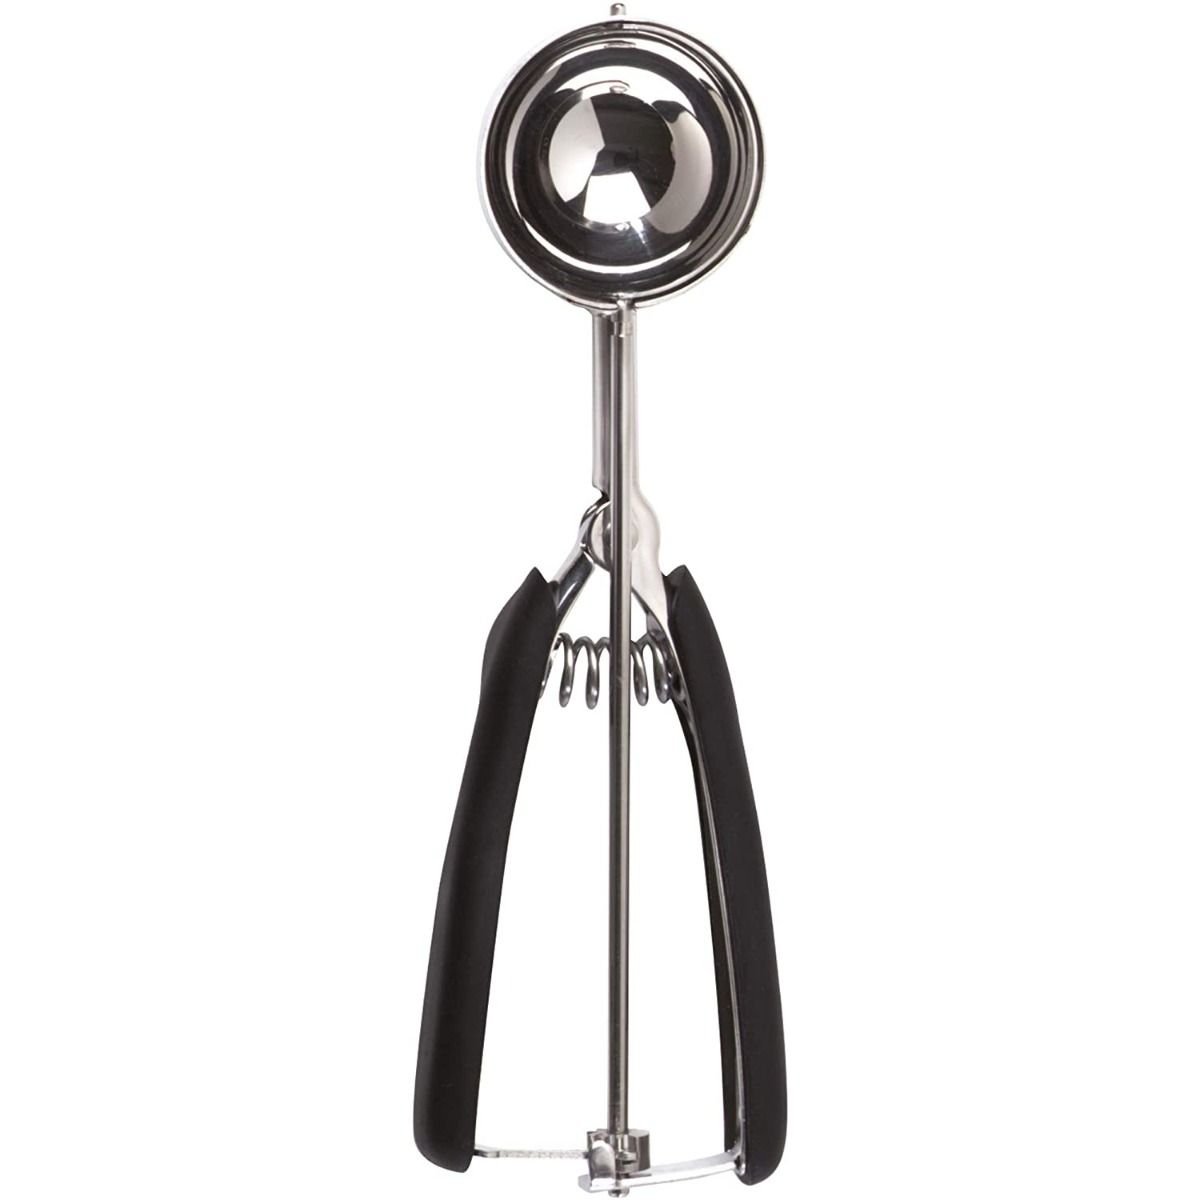 Scoop / Cookie Dropper – The Better House